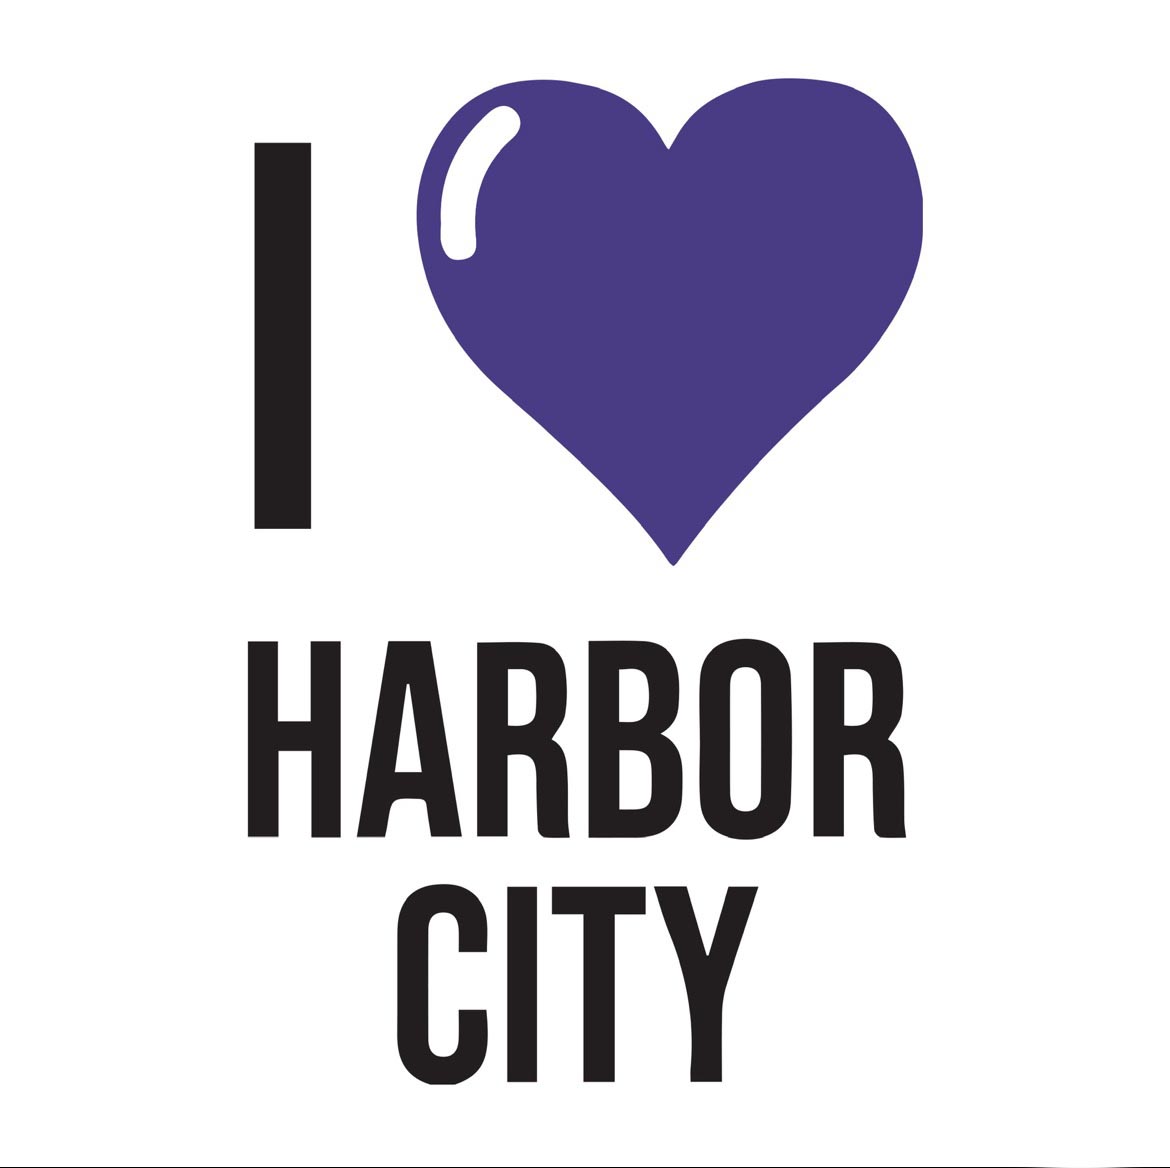 I love Harbor City and Arise and Go partner